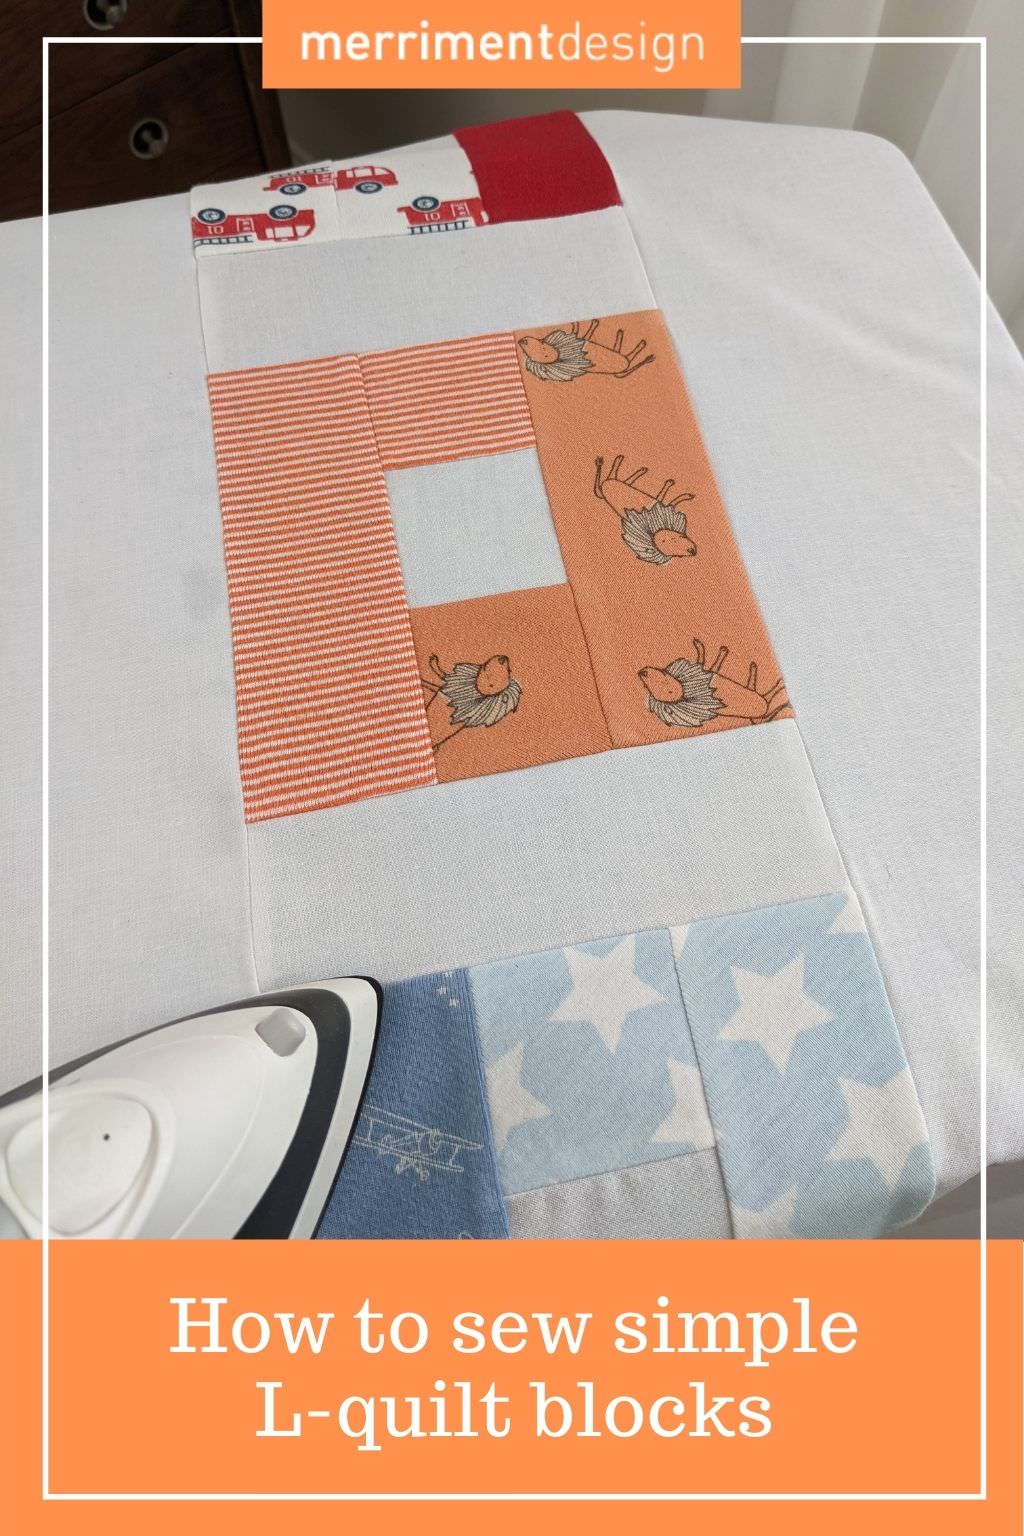 How to sew simple L-quilt blocks